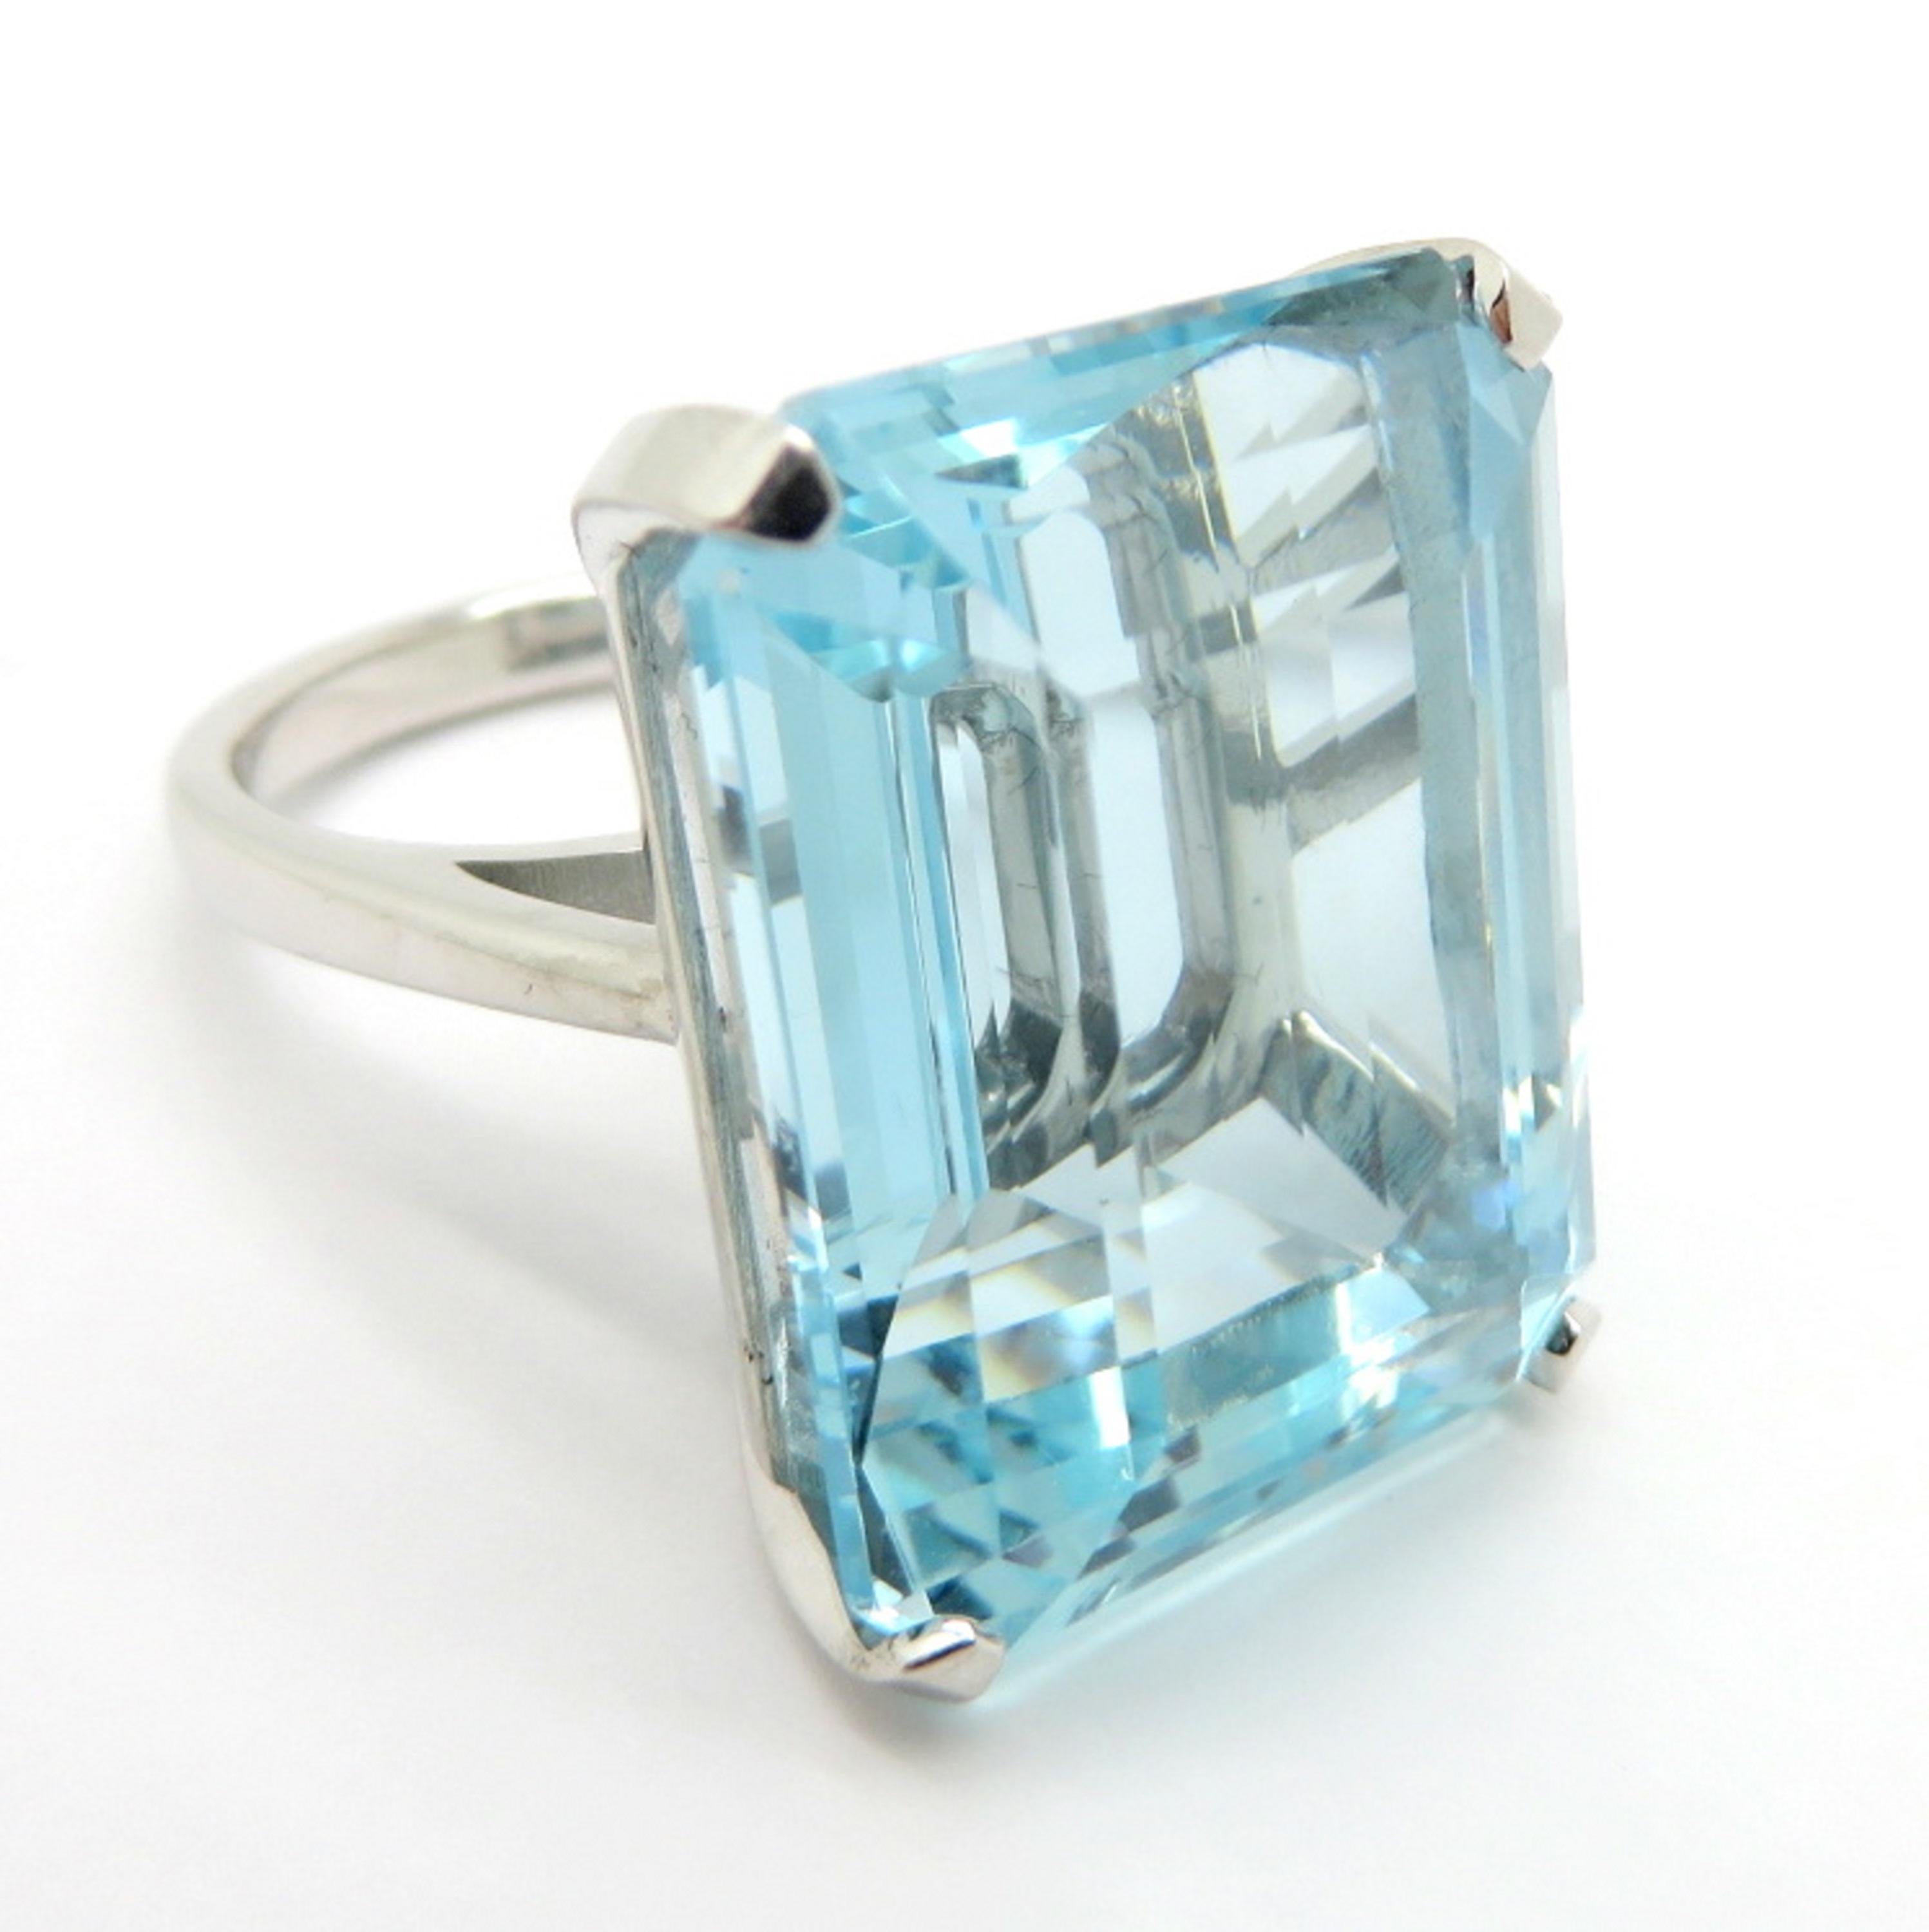 For sale is a large estate vintage emerald cut aquamarine ring!
Showcasing one (1) Emerald Cut aquamarine, basket set in a 14 karat white gold setting weighing approximately 36.18 carats.
Hallmarked 14K and the ring has a high polish finish.
The